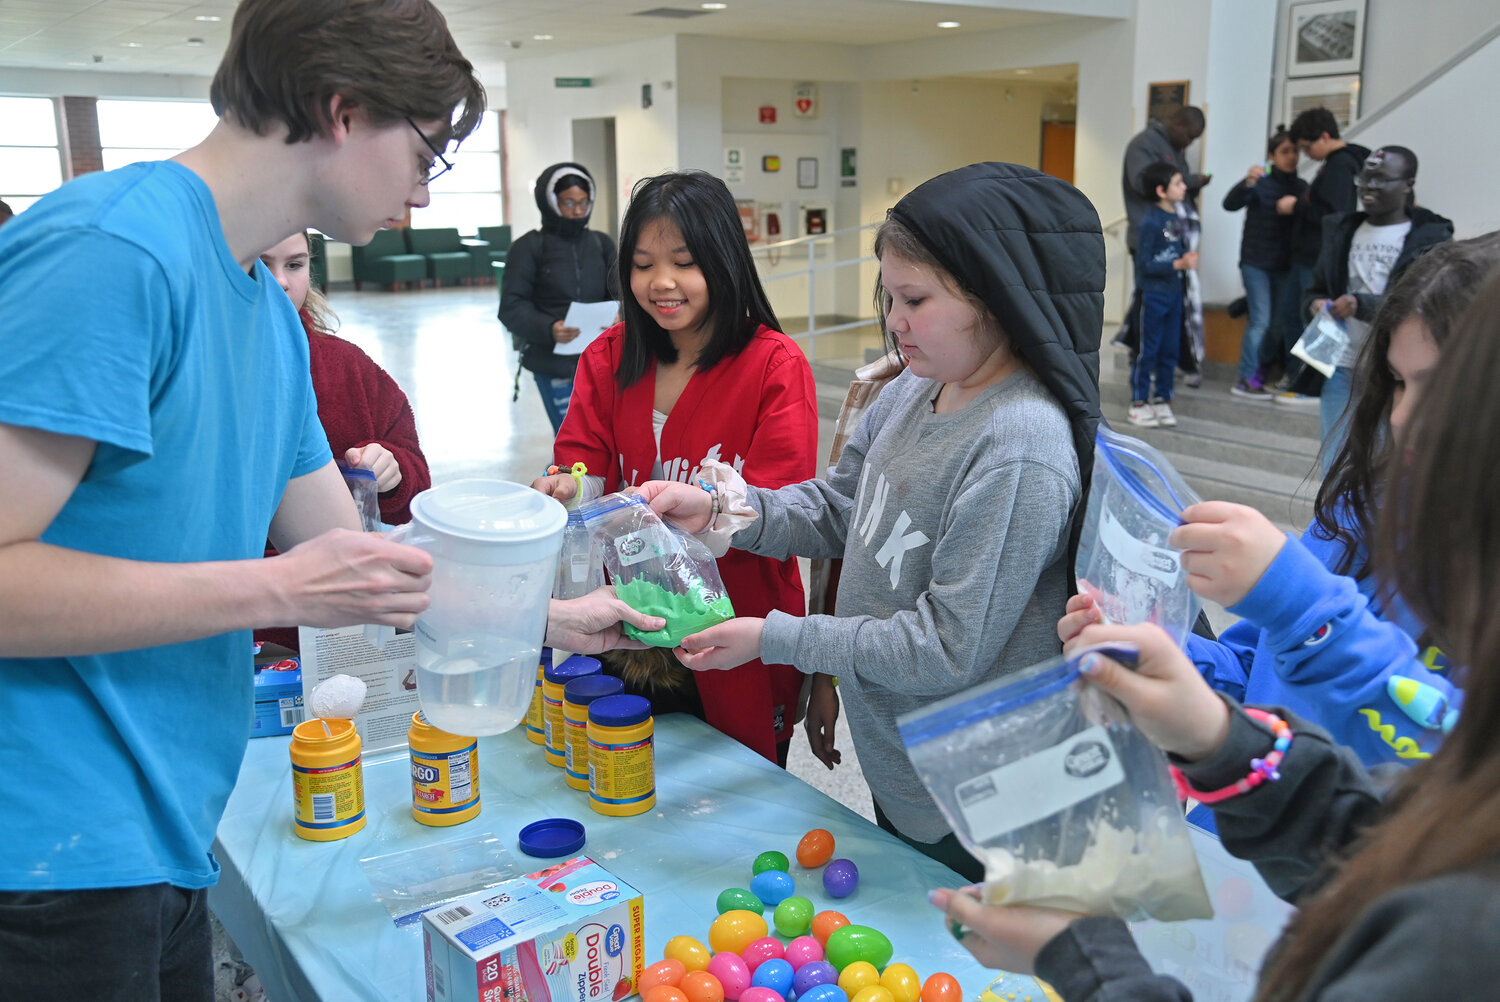 Brandon Massett, a second year student at MVCC in the physics and engineering science program, left, helps students from Ann Reiben’s sixth grade class at Columbus Elementary School make Oobleck Friday, March 24 during STEM Fest in Wilcox Hall.